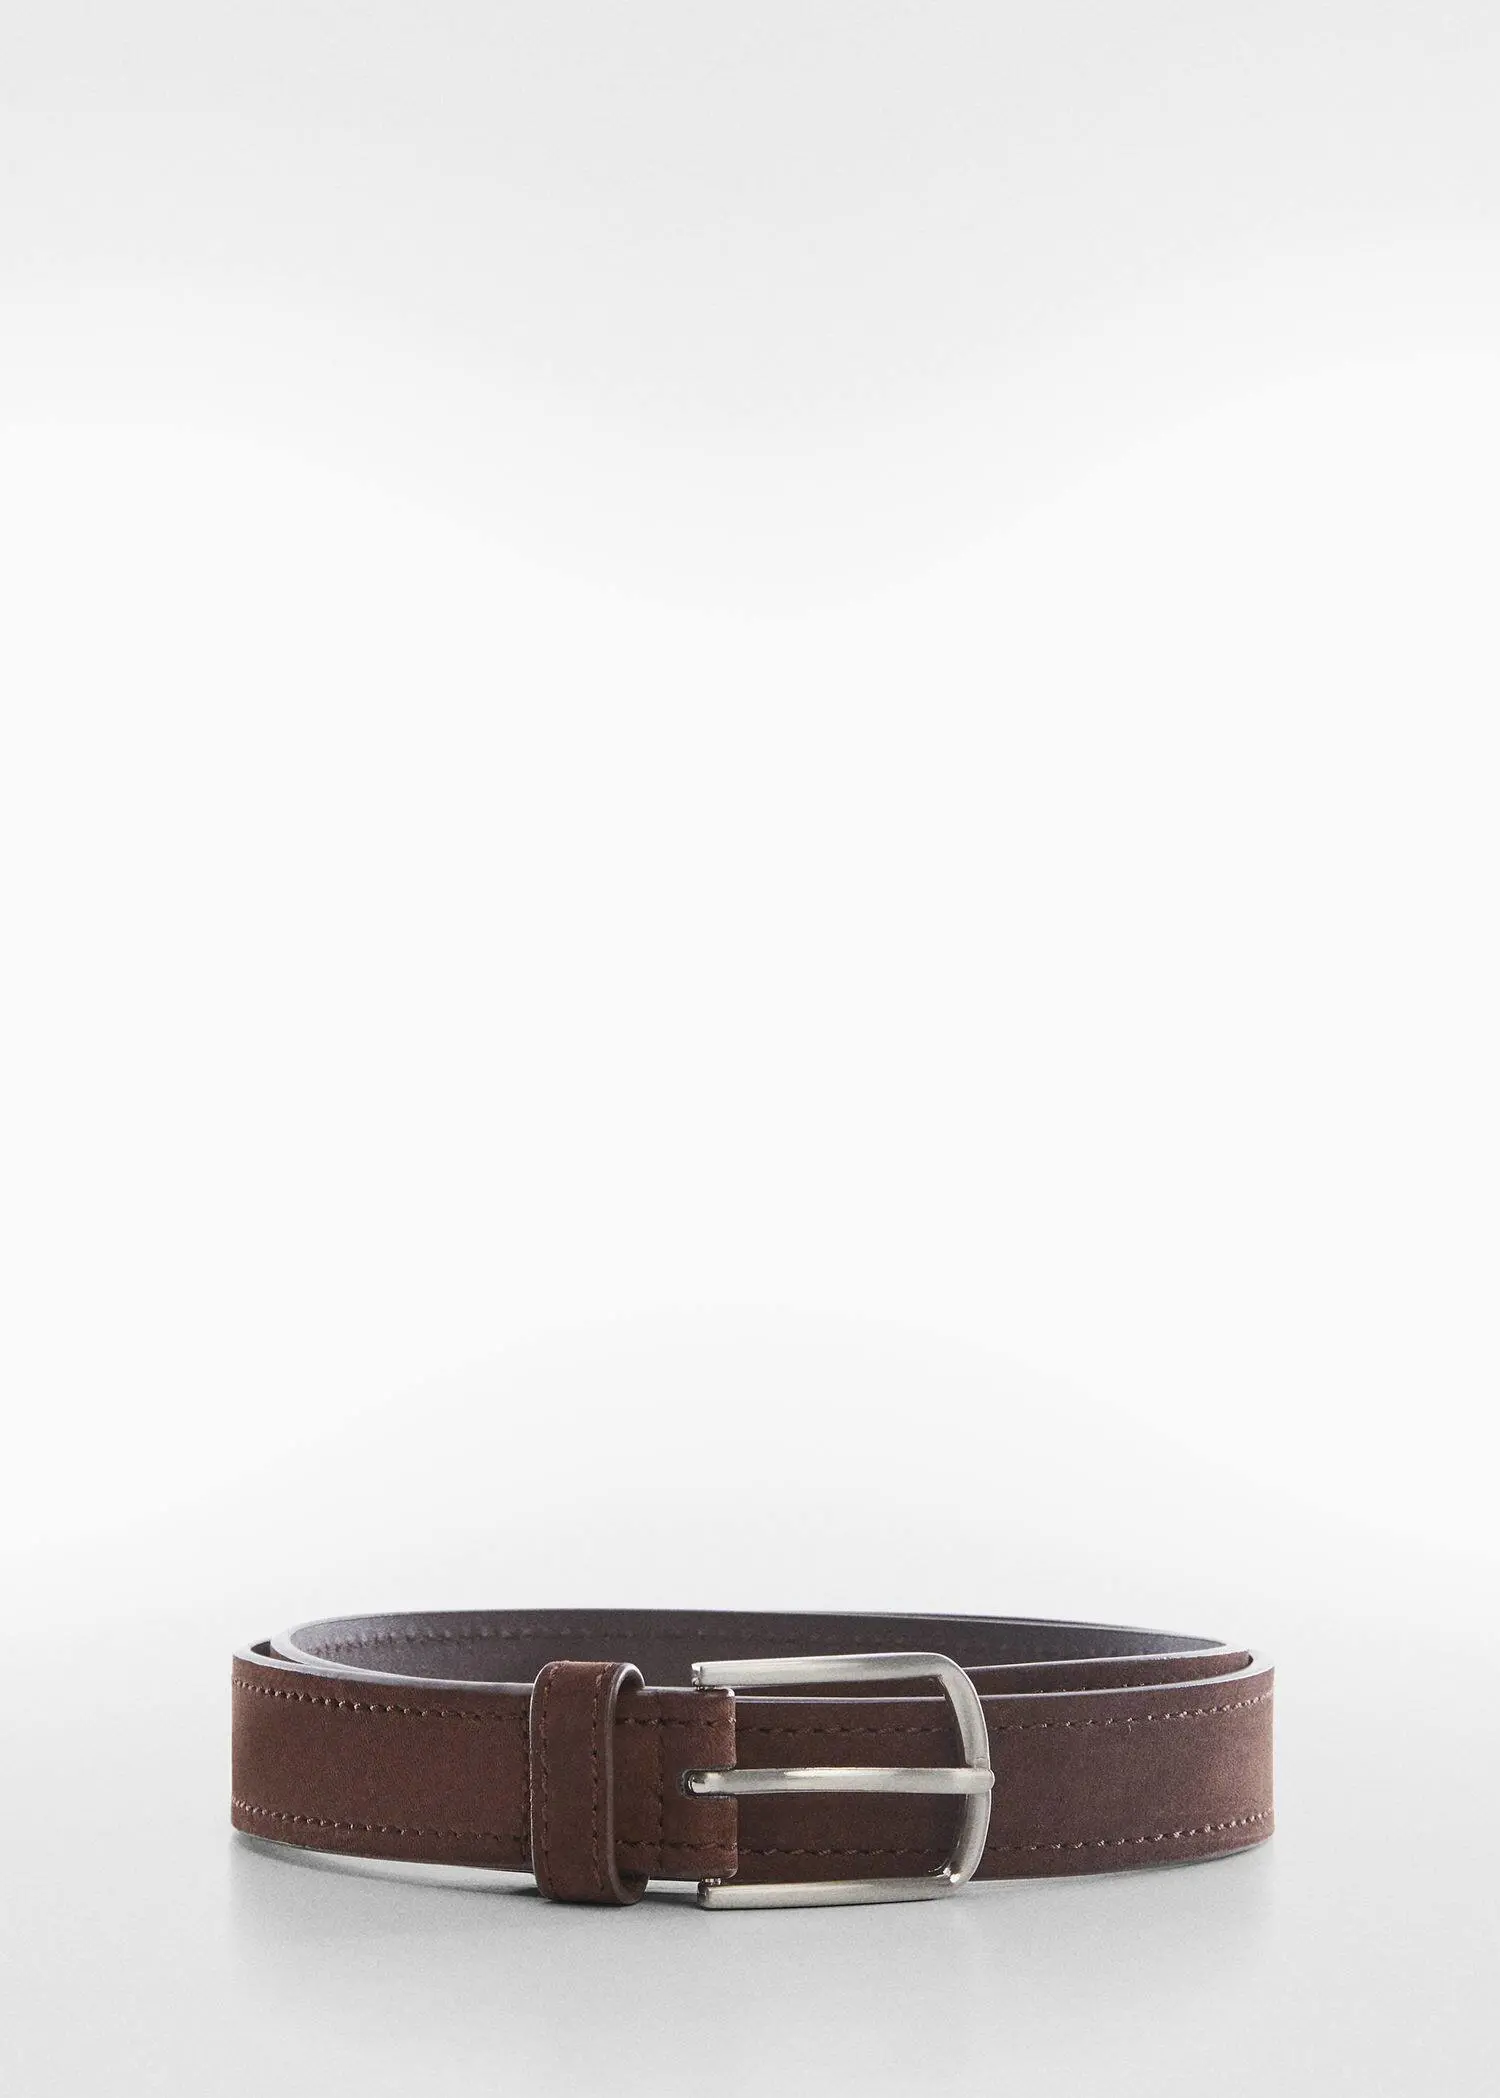 Mango Suede leather belt. a close up of a belt on a white background 